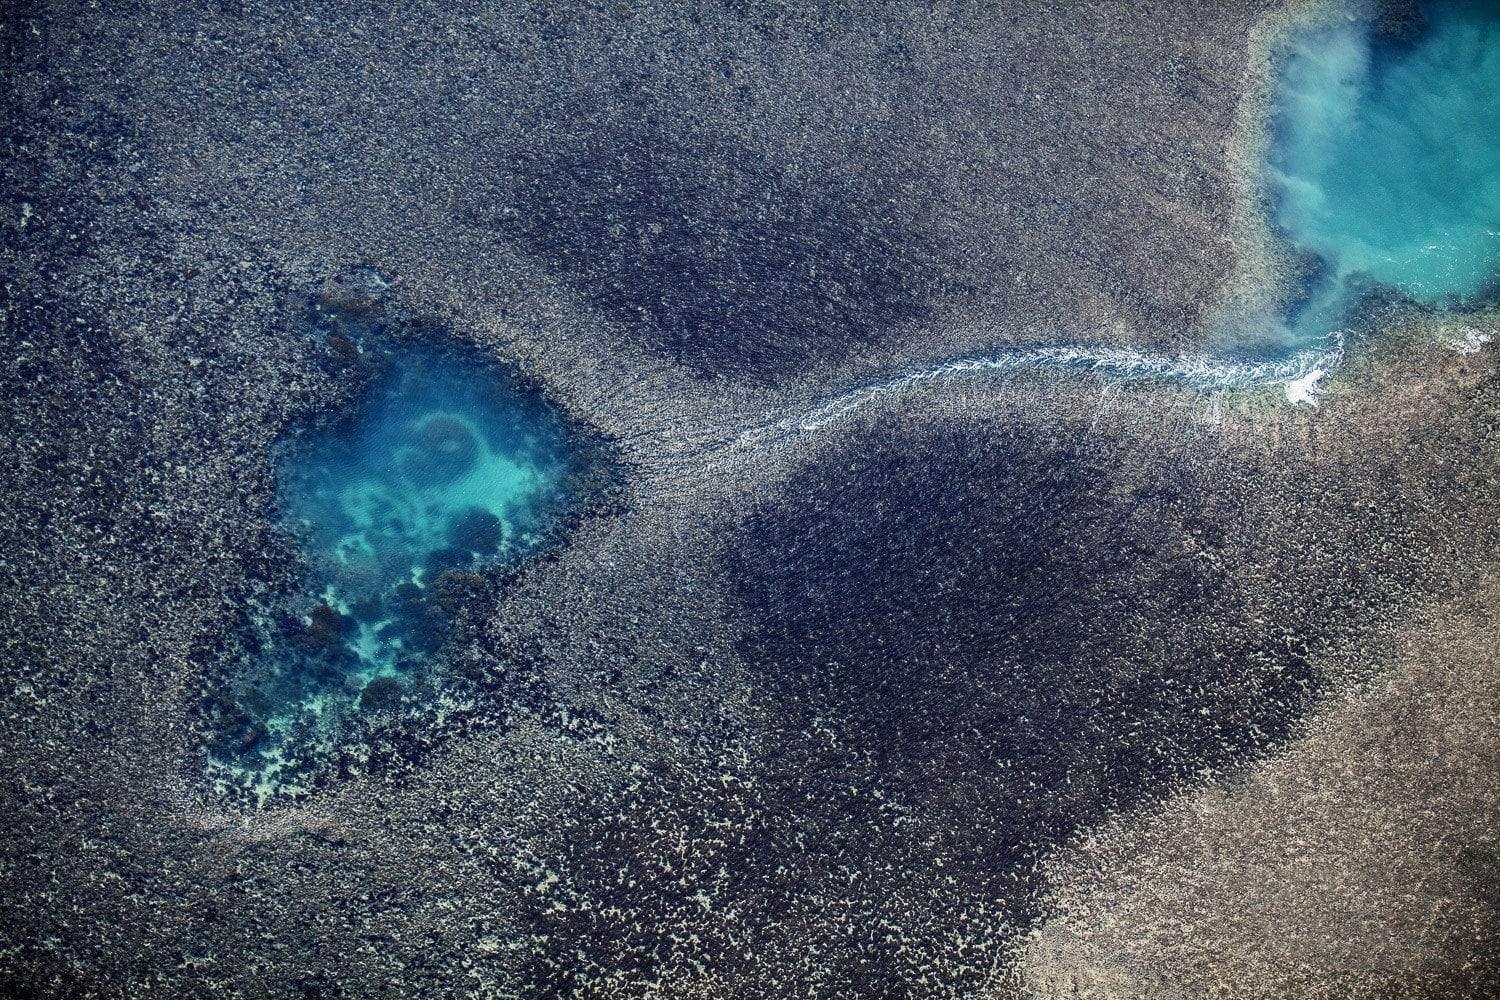 Aerial view of a rocky land with two unique small natural pools full of ice-blue water, Linked Pools